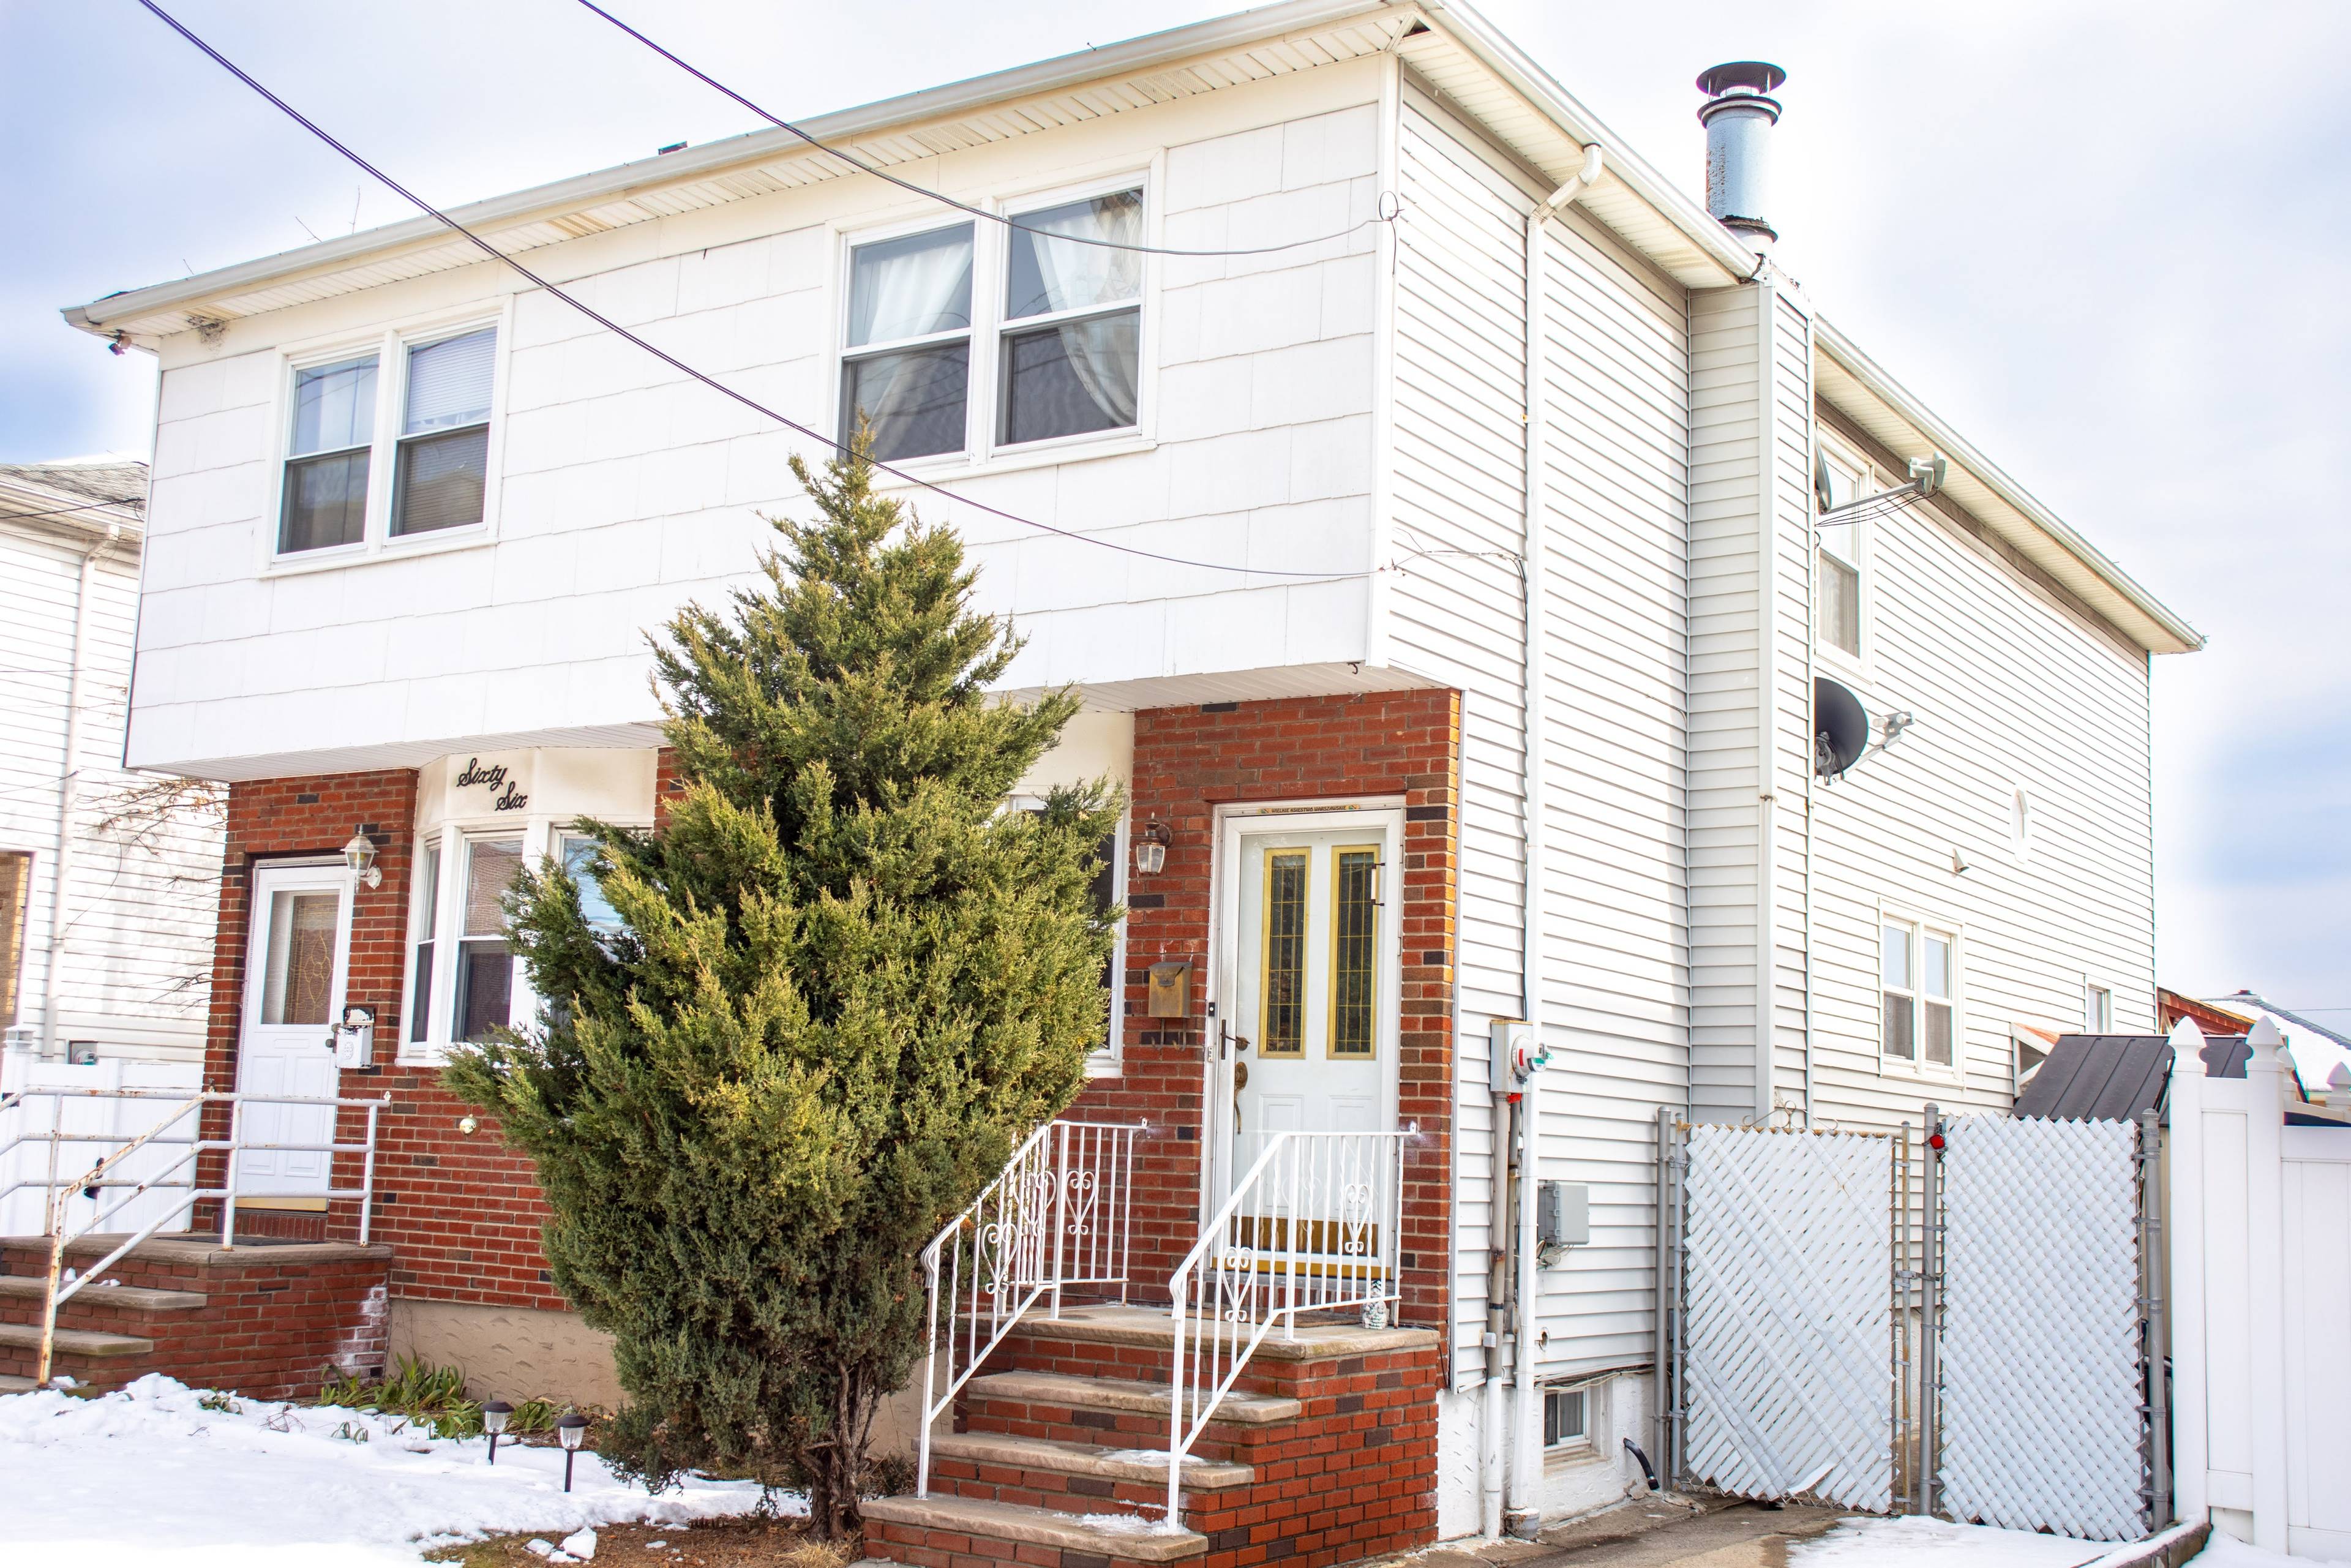 Spacious and well maintained One Family Semi Attached home offering 3 Bedrooms 2.